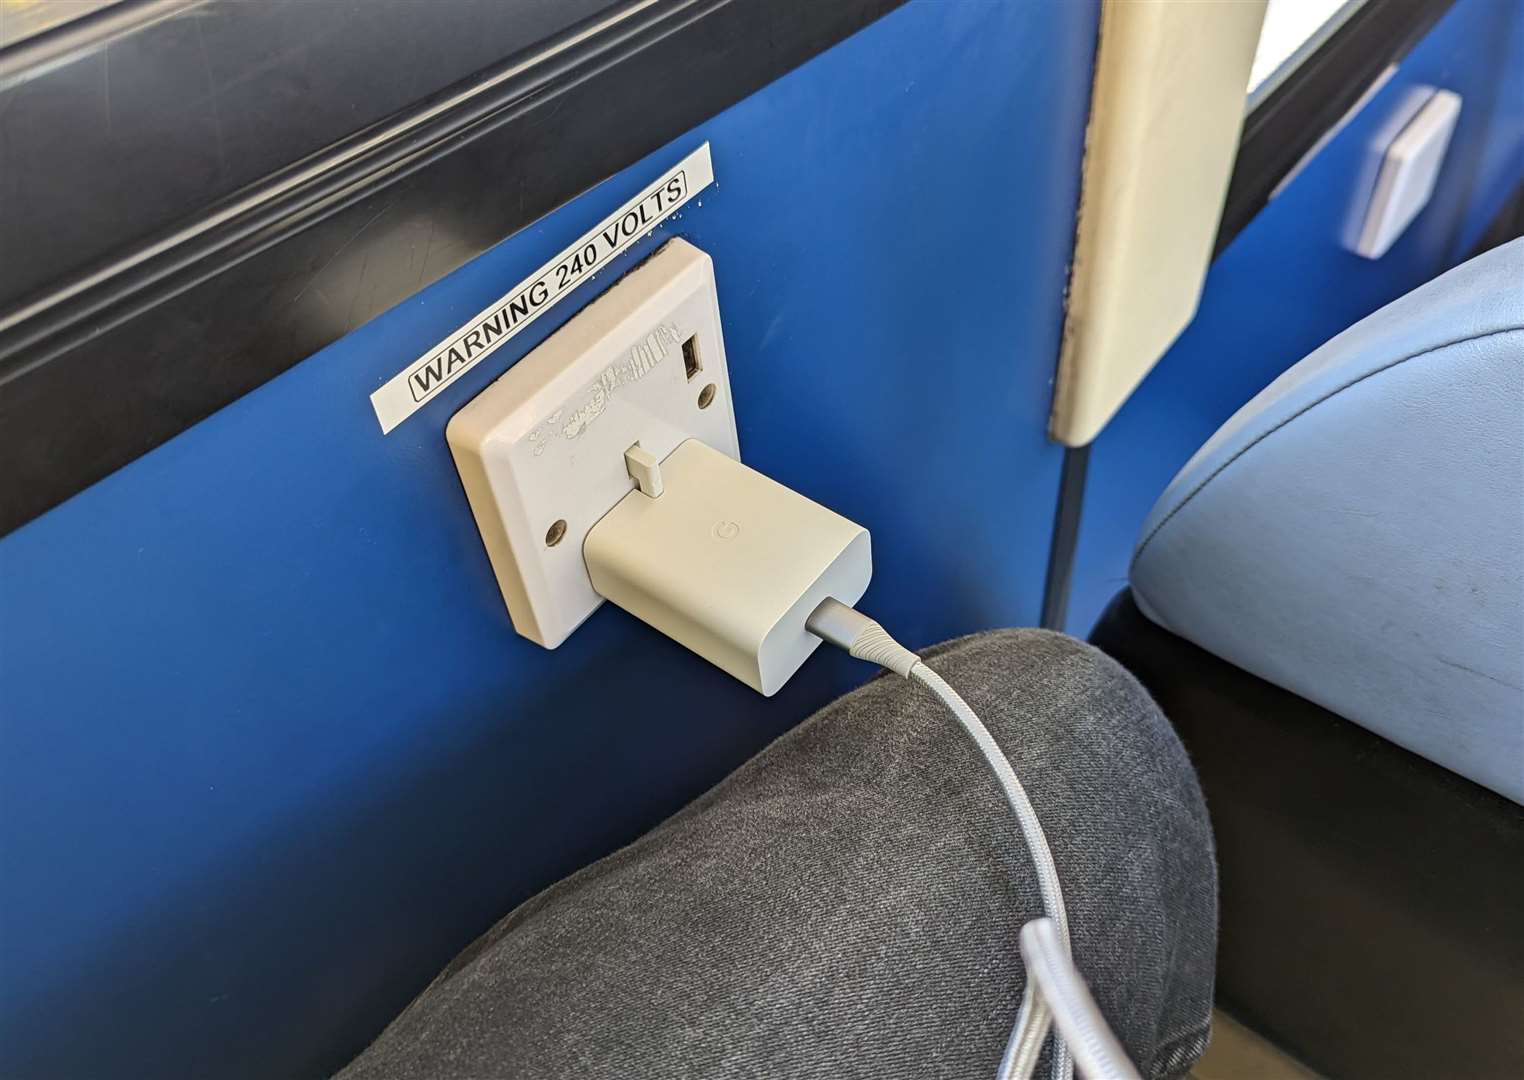 Plug sockets are a welcome addition on buses